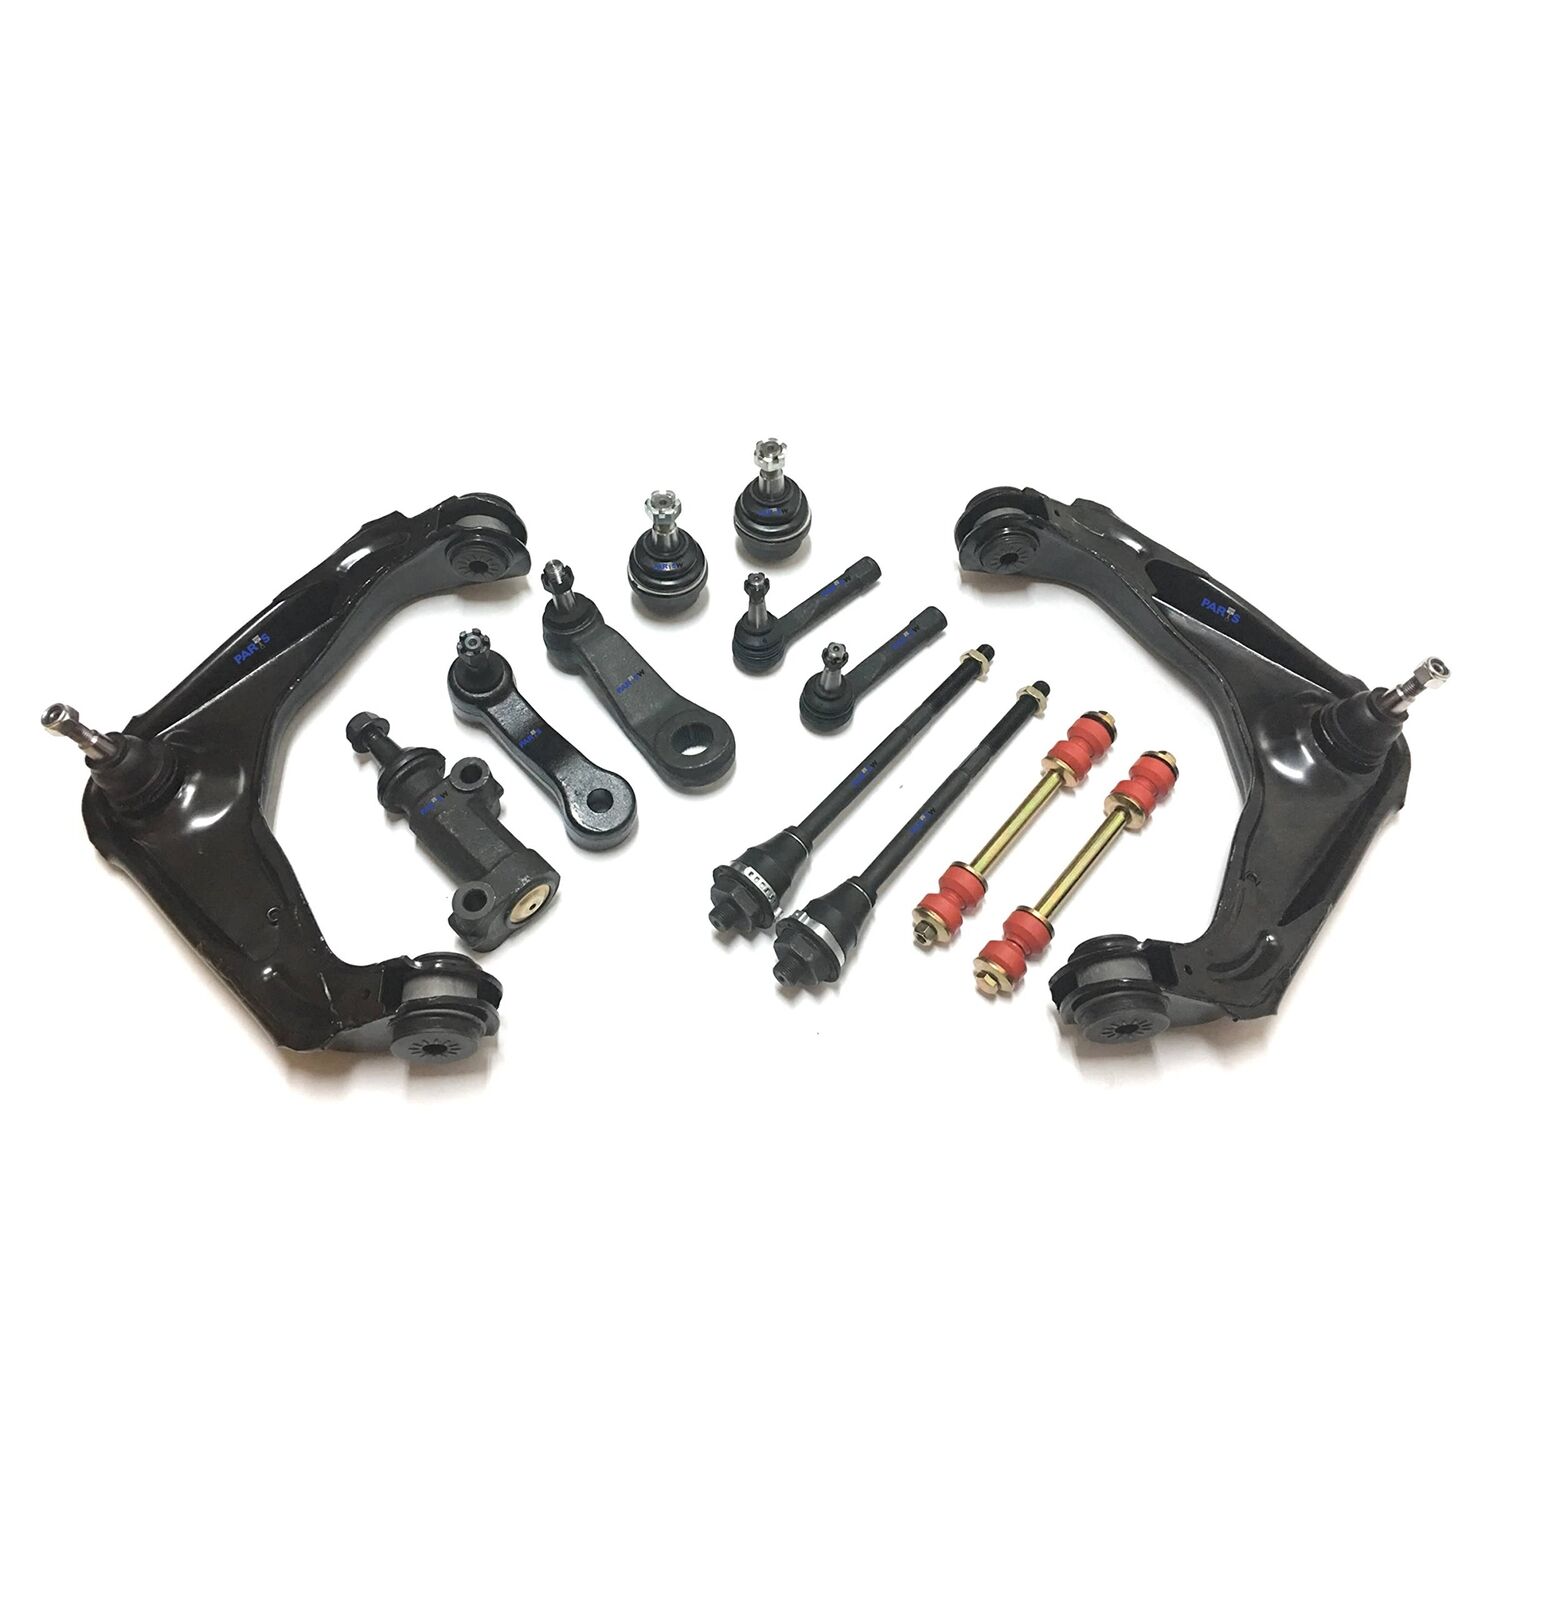 New 13 Pc Upper Control Arms & Ball Joints + Suspension Kit for Chevrolet GMC